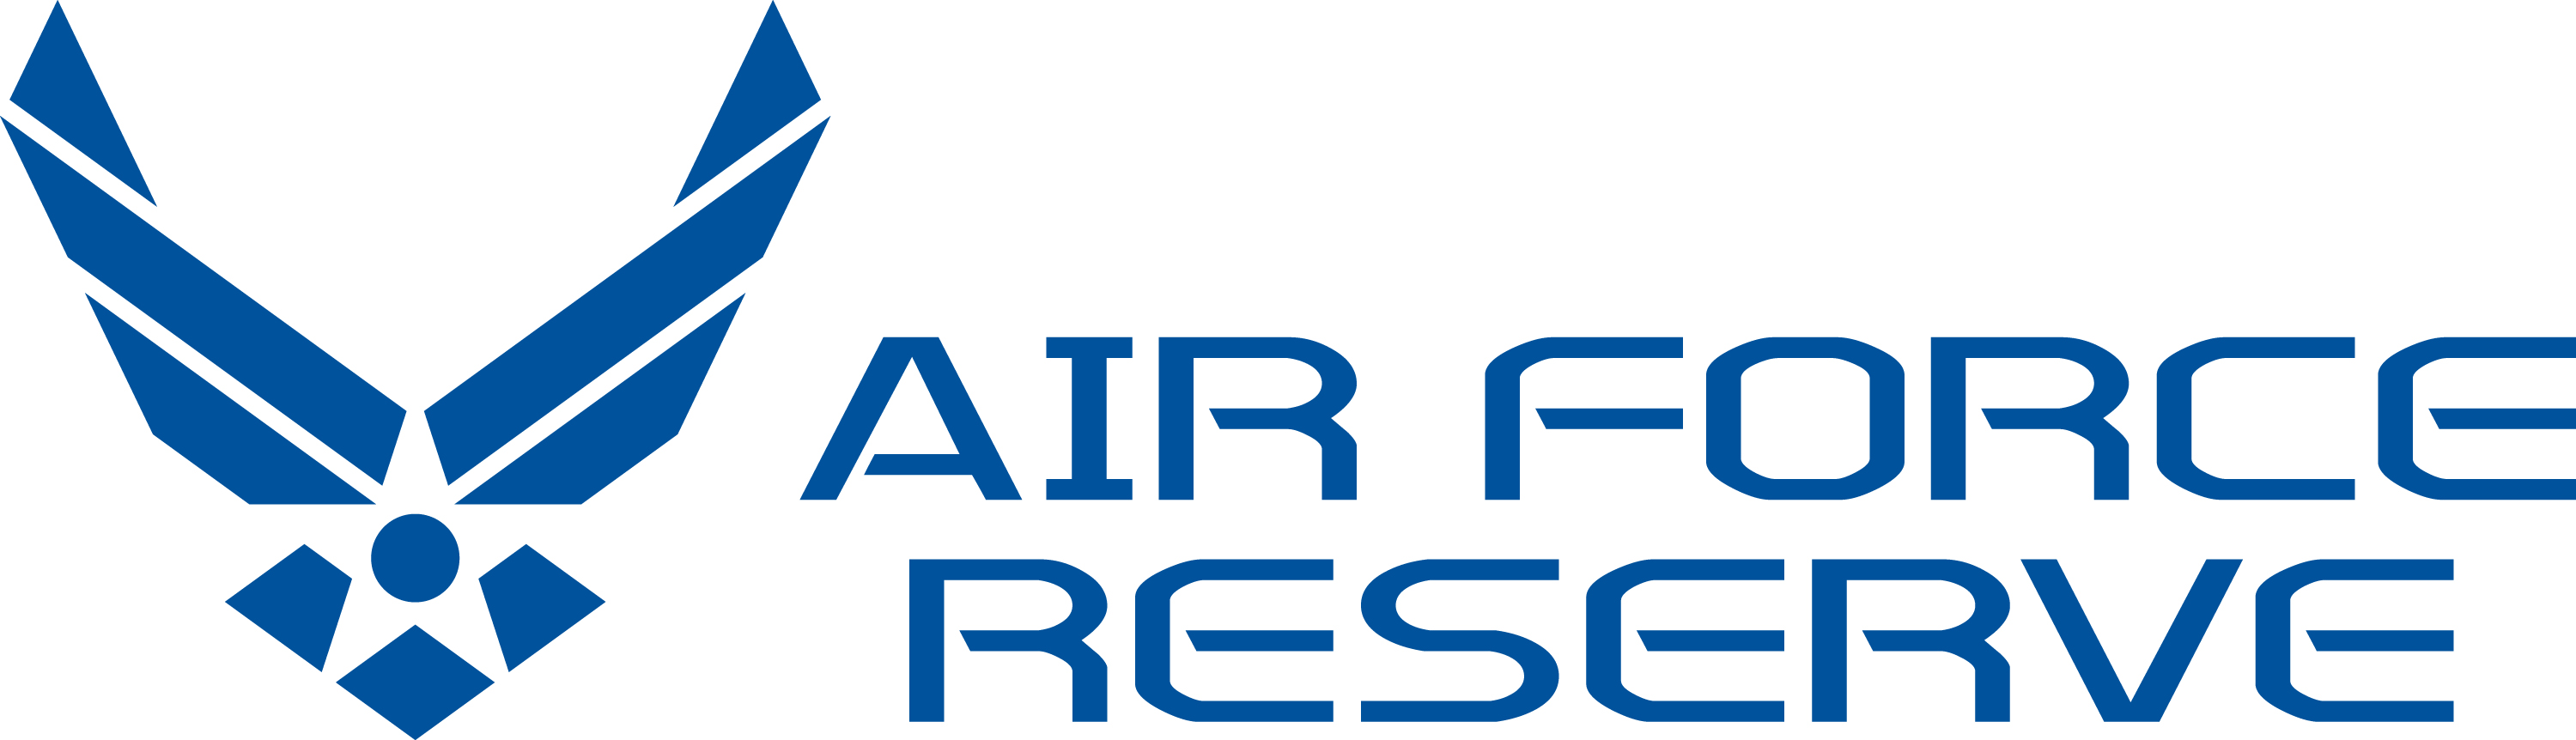 Air Force Reserve Logo Stacked Blue